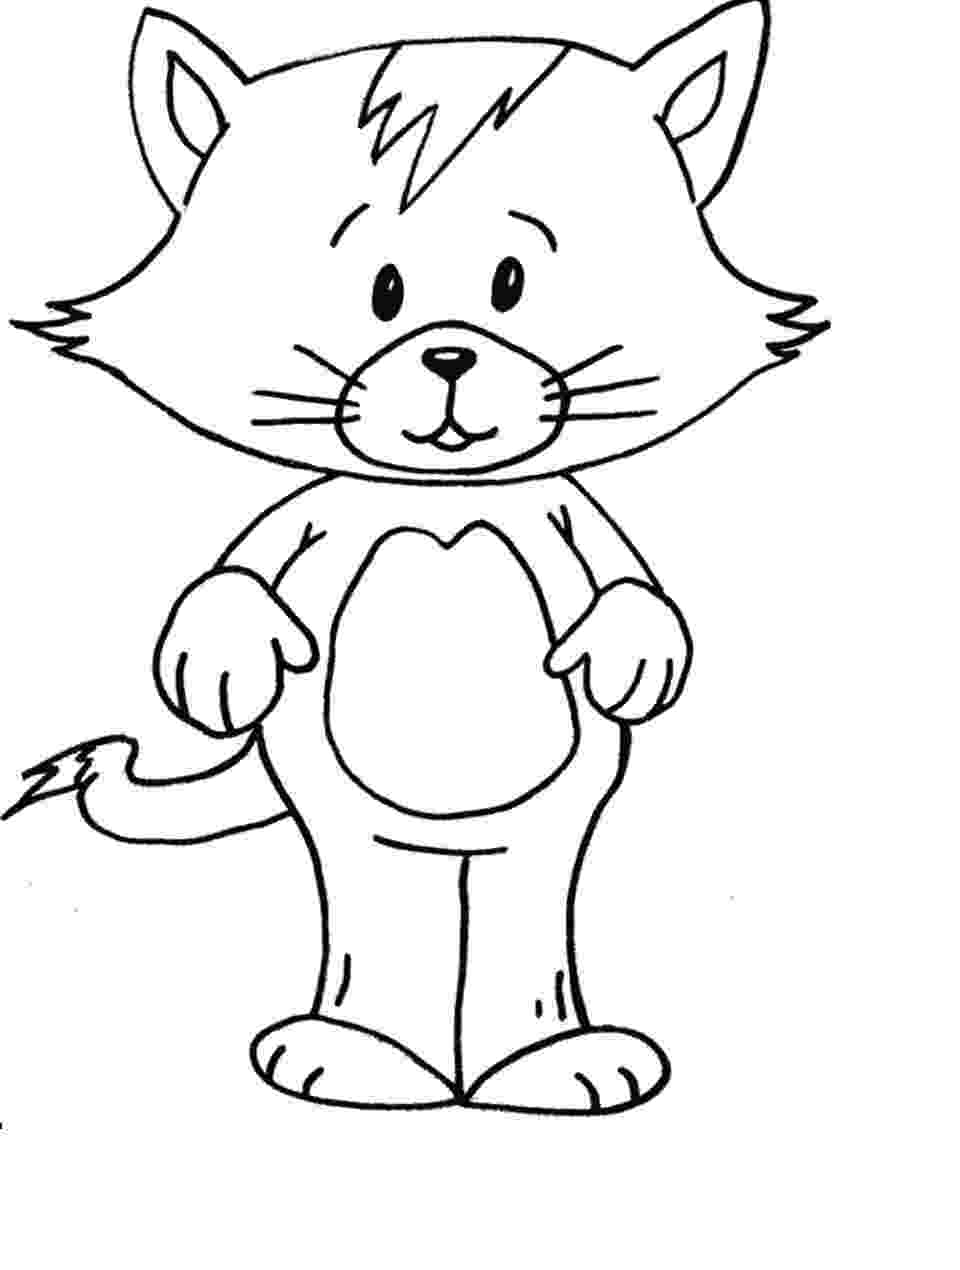 kitty cat pictures to color cat coloring pages free download best cat coloring pages kitty cat pictures color to 